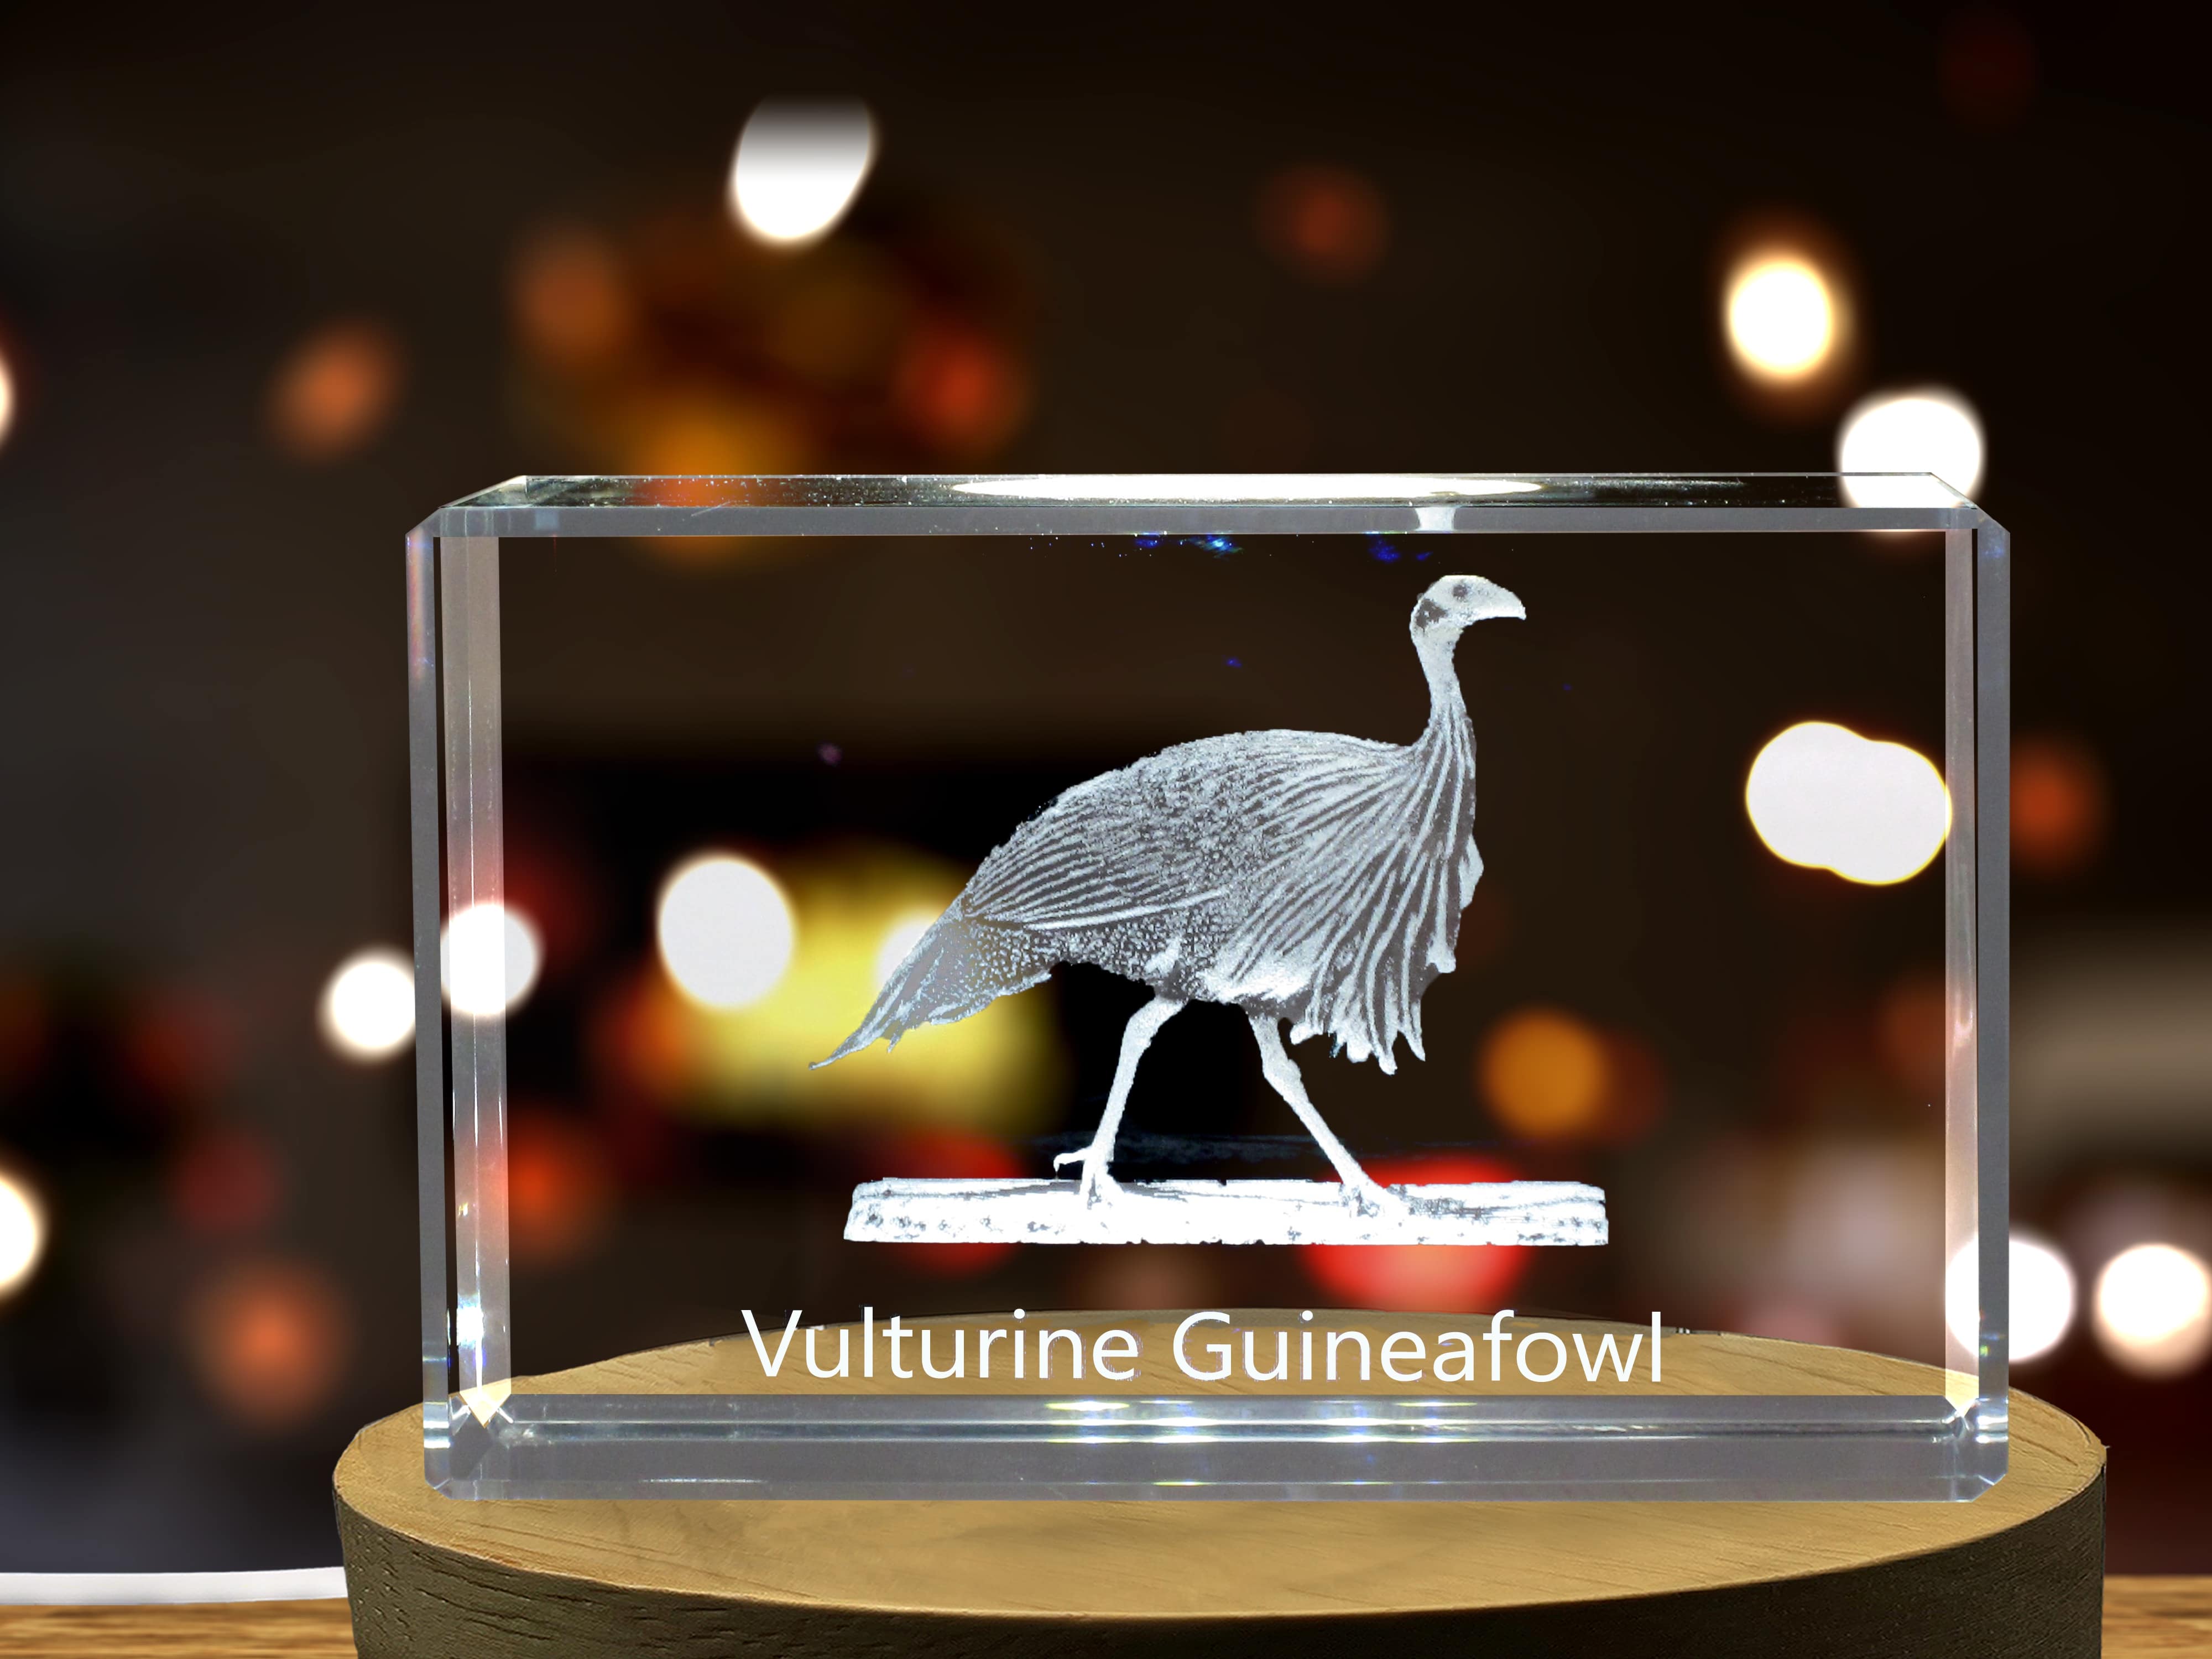 Vulturine Guineafowl 3D Engraved Crystal 3D Engraved Crystal Keepsake/Gift/Decor/Collectible/Souvenir A&B Crystal Collection